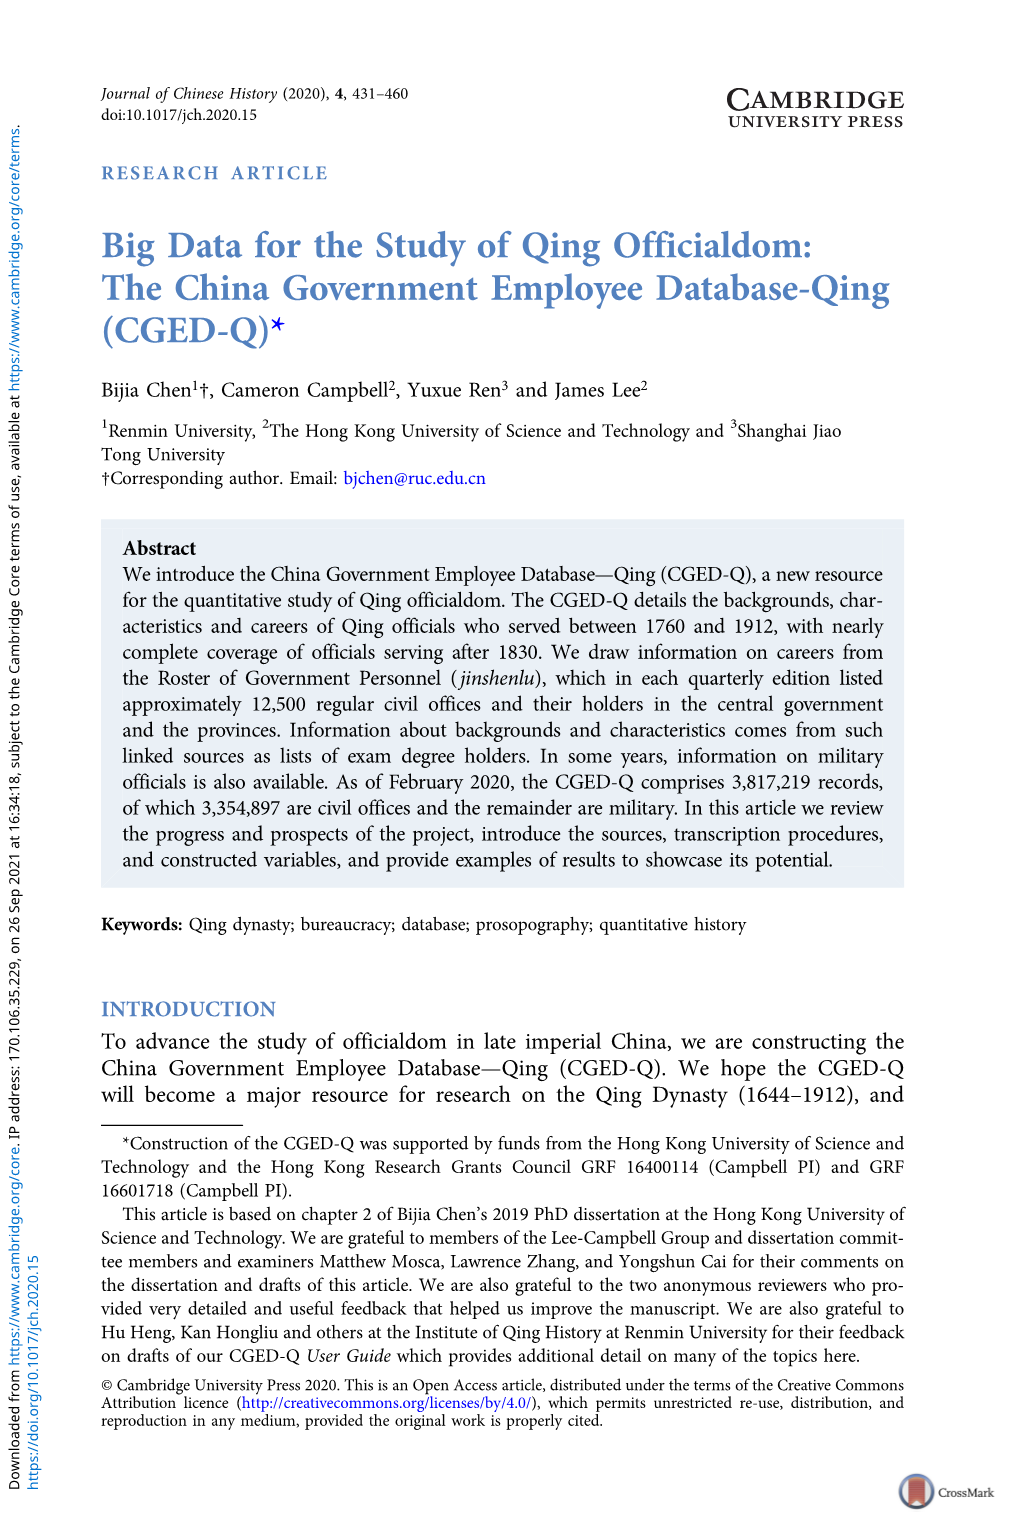 Big Data for the Study of Qing Officialdom: the China Government Employee Database-Qing (CGED-Q)*